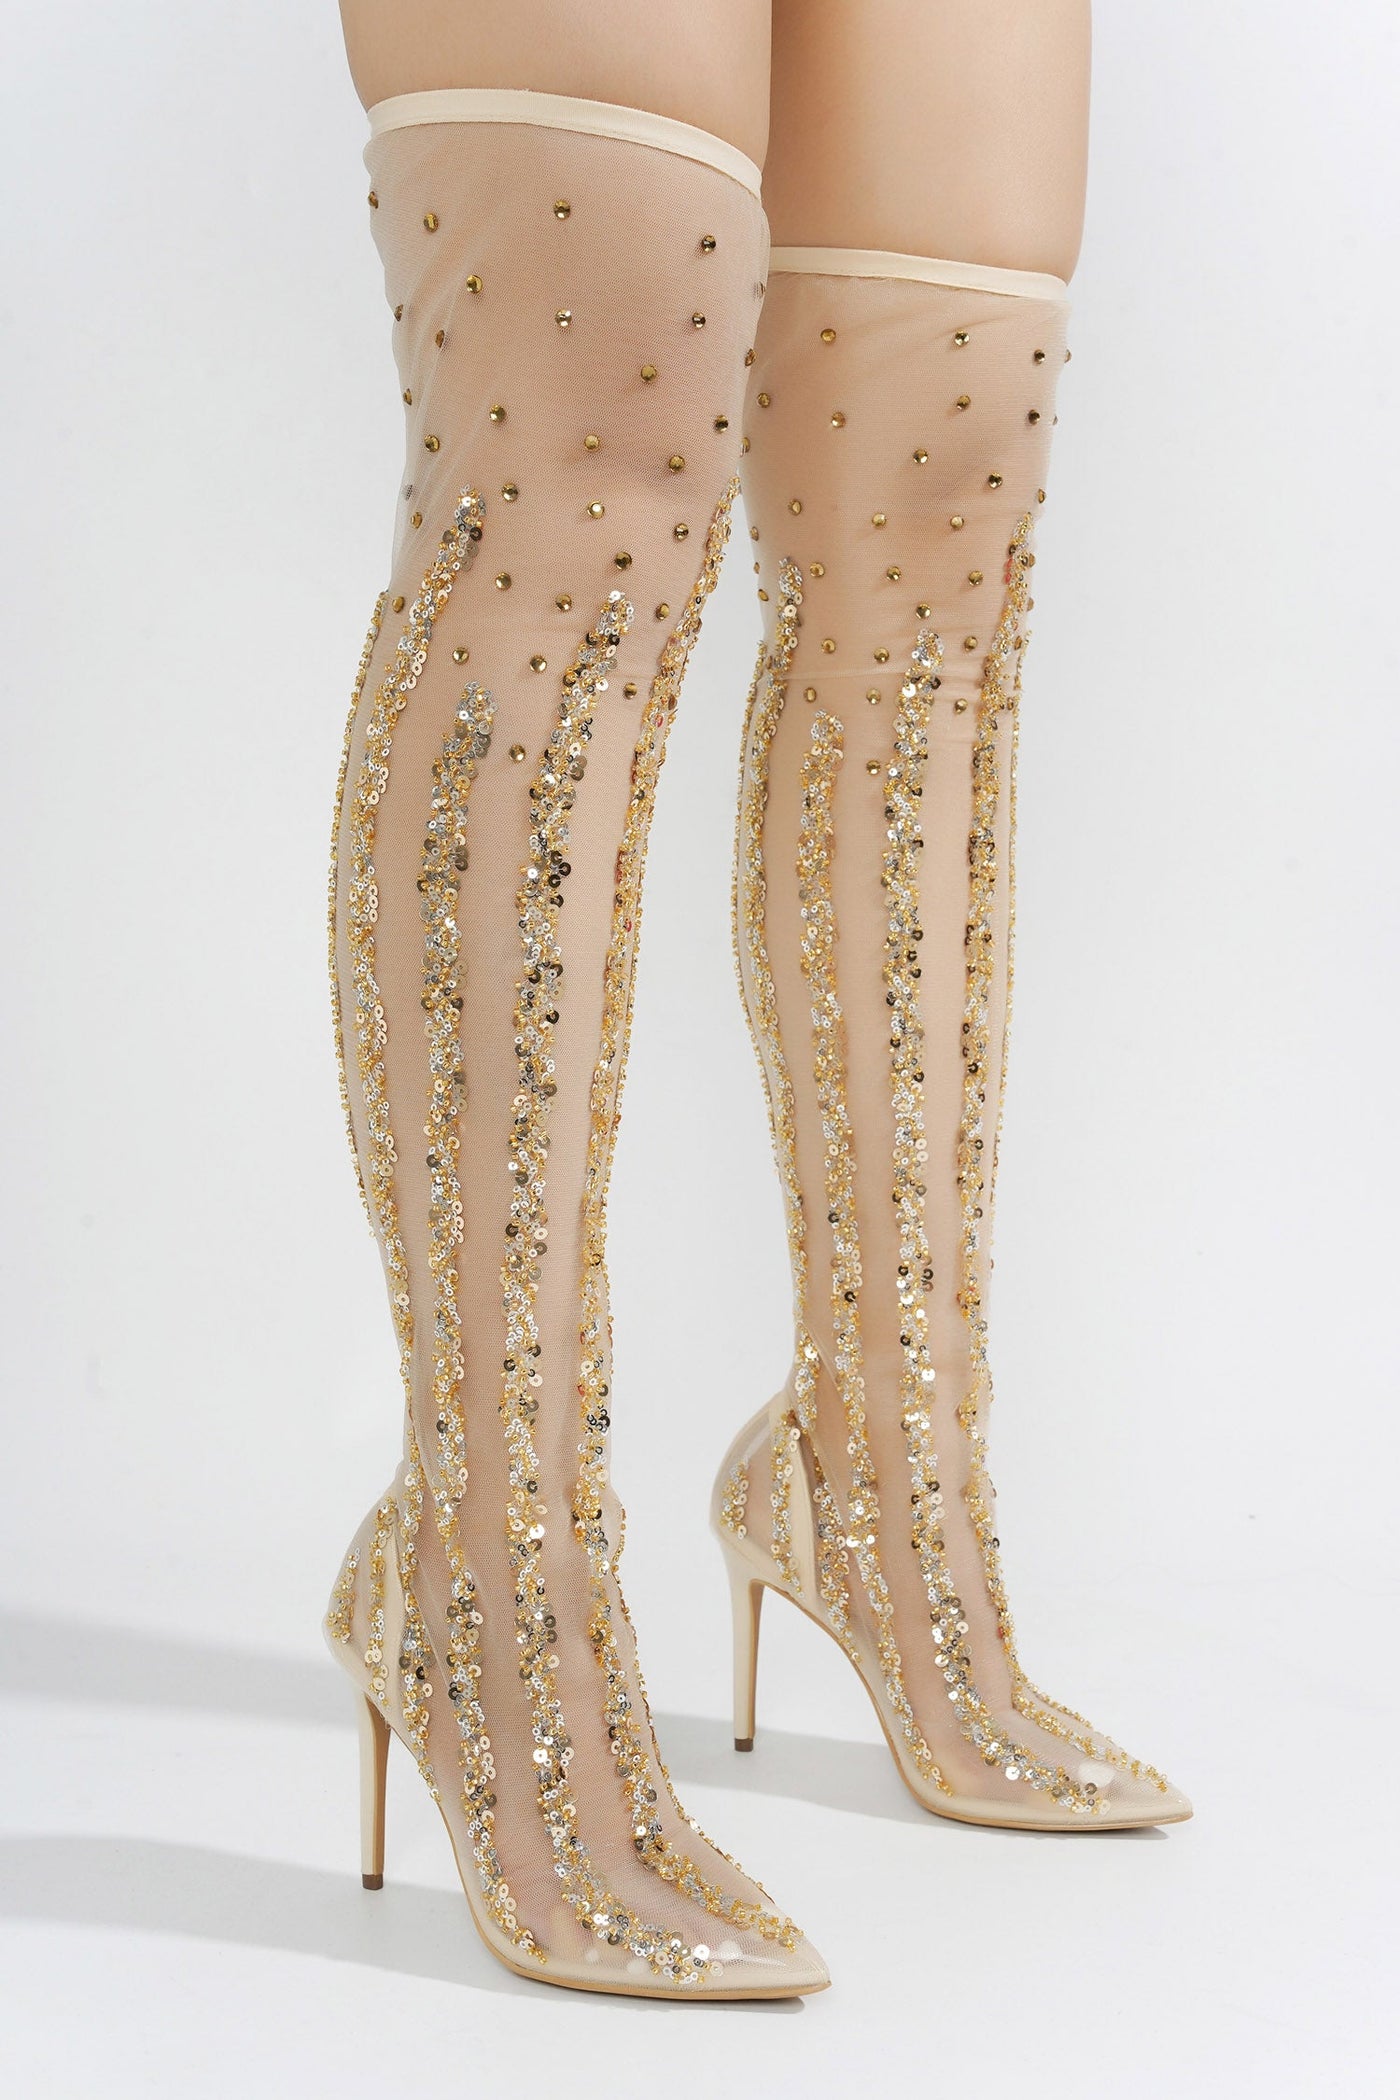 BRIDE - NUDE Thigh High Boots - AMIClubwear